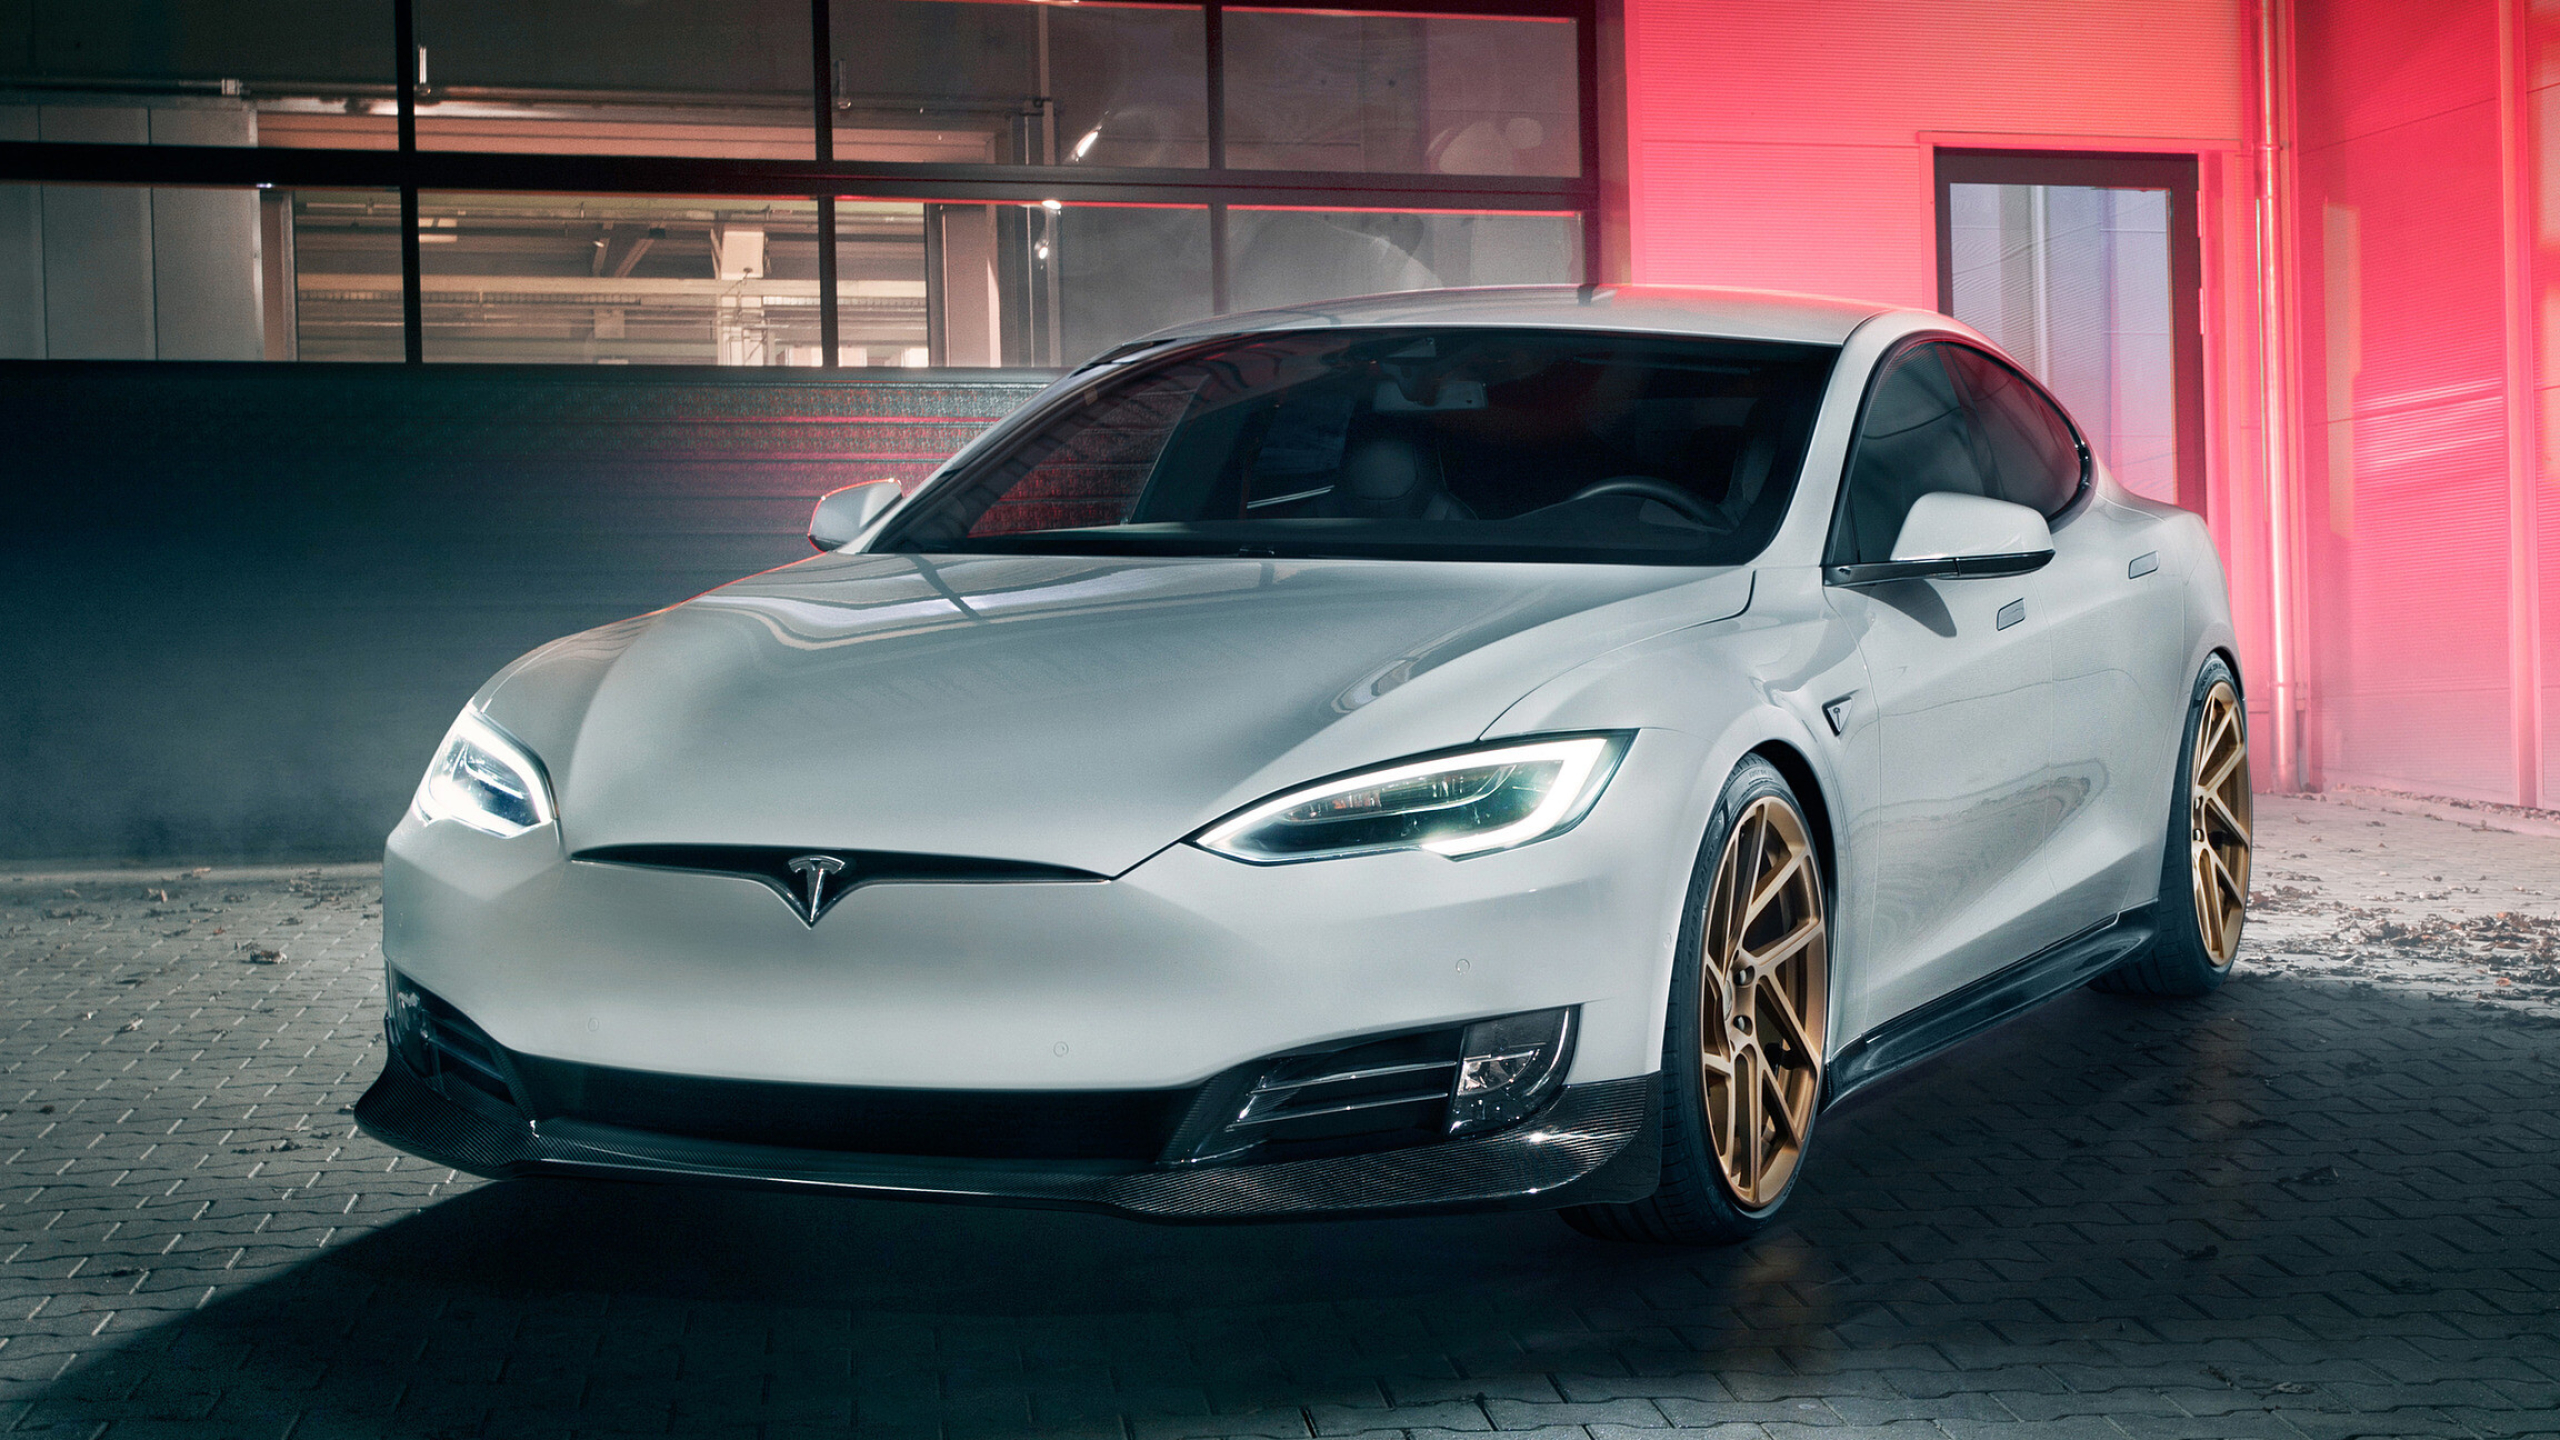 Tesla Model S: The fully-electric car, Has an estimated driving range of more than 400 miles. 2560x1440 HD Background.